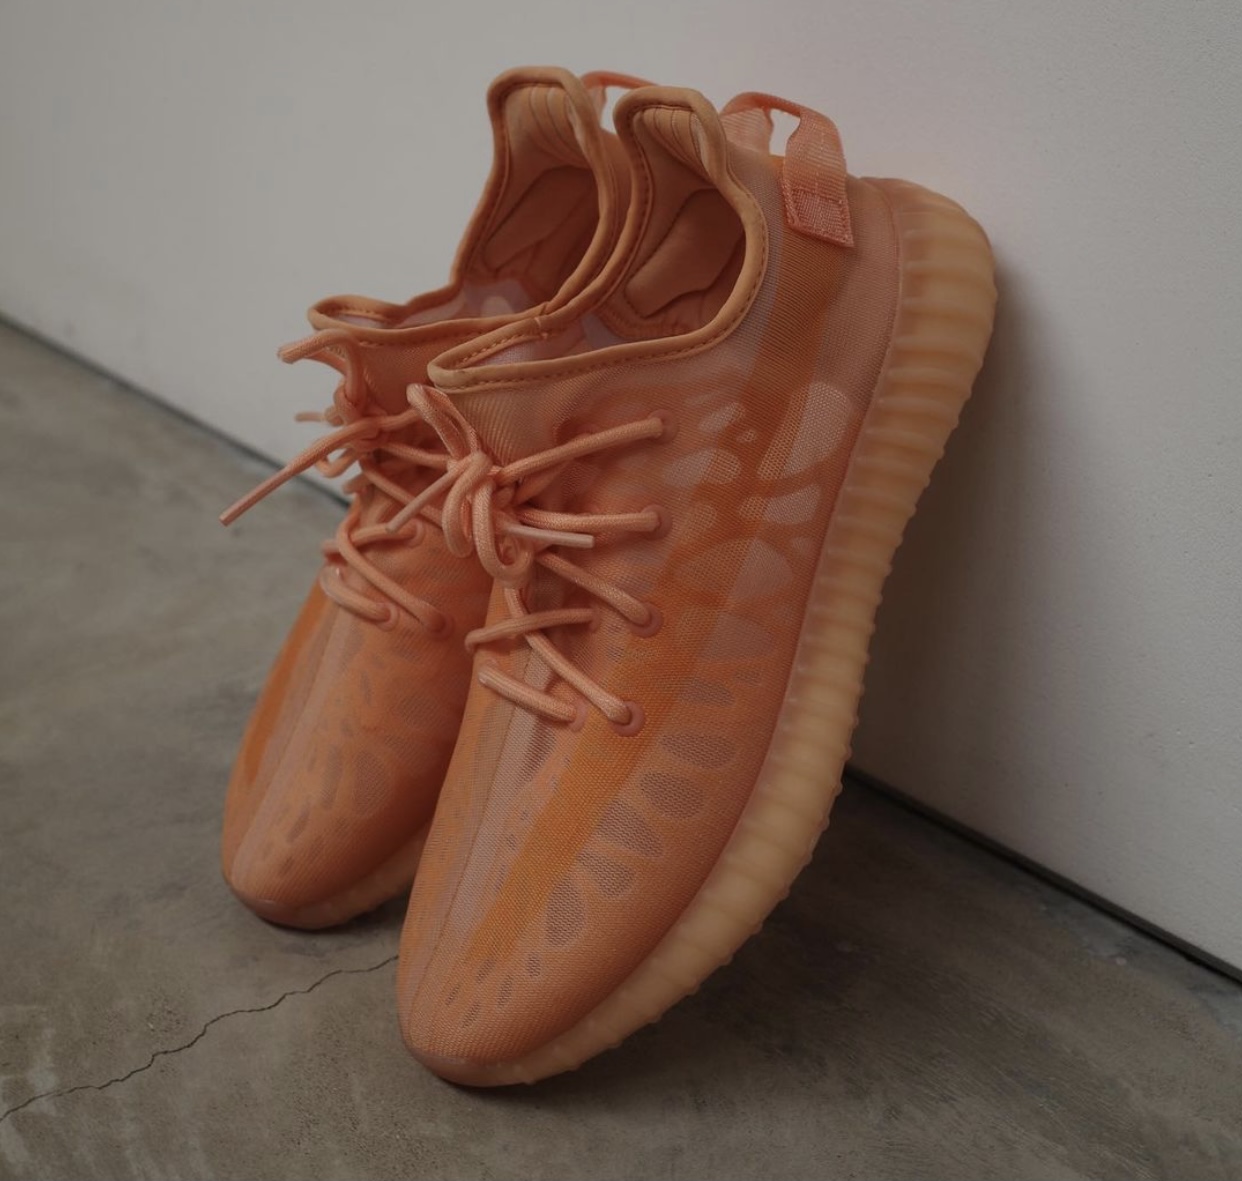 adidas Yeezy Boost 350 V2 Mono Clay Release Date